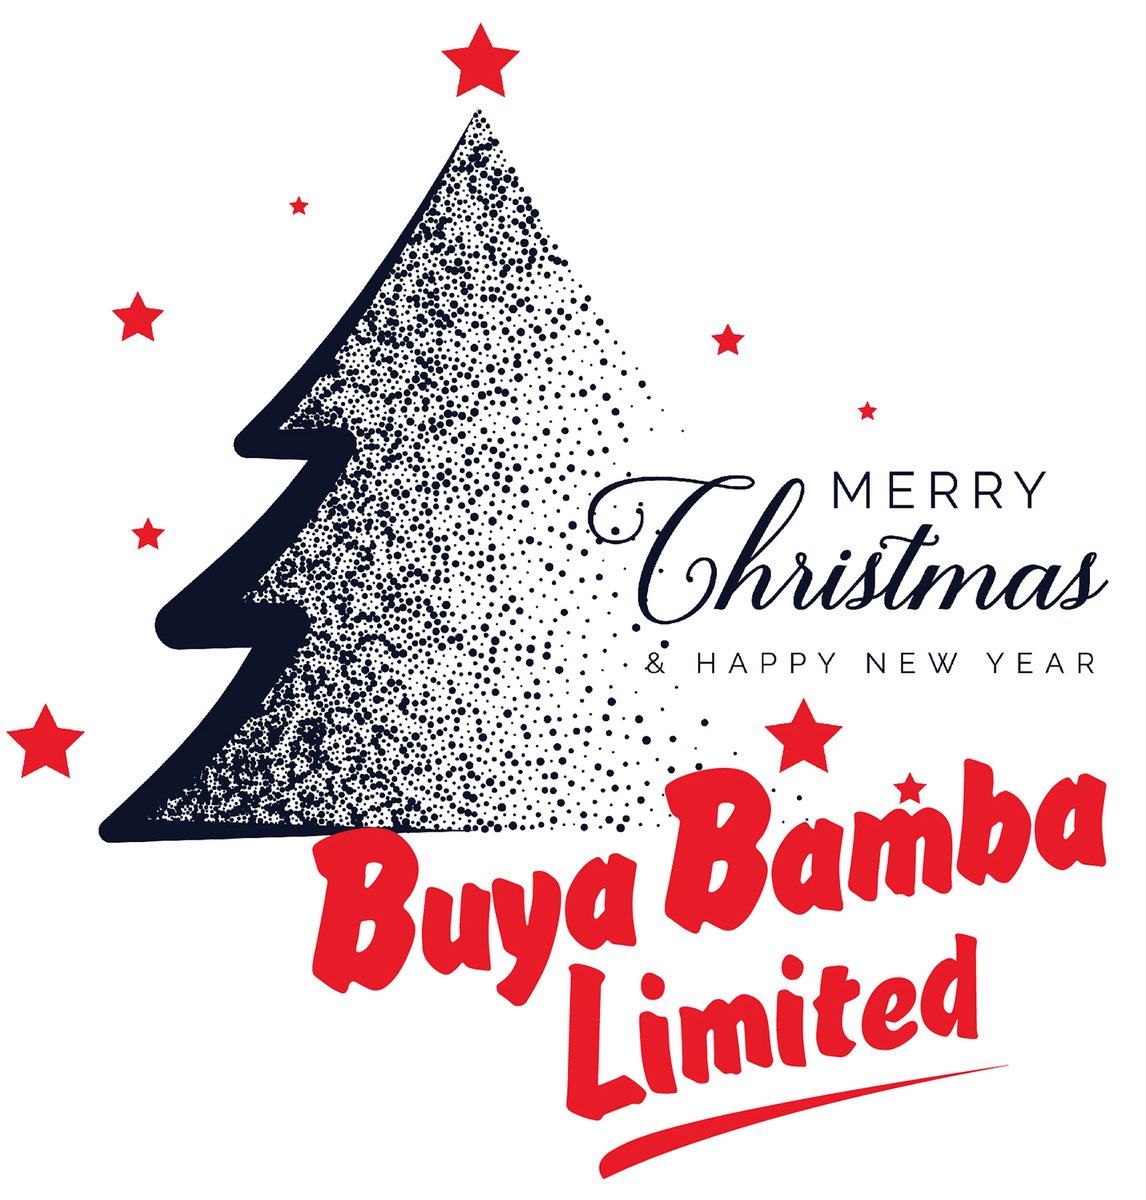 On behalf of Buya Bamba Limited we would like to wish all our Twitter followers, staff, friends and family a Blessed Christmas filled with joy, love and peace.

#BuyaBamba #Zambia #potatoes #Christmas #Christmas2020 #staysafe #stayhealthy #PracticeSocialDistancing